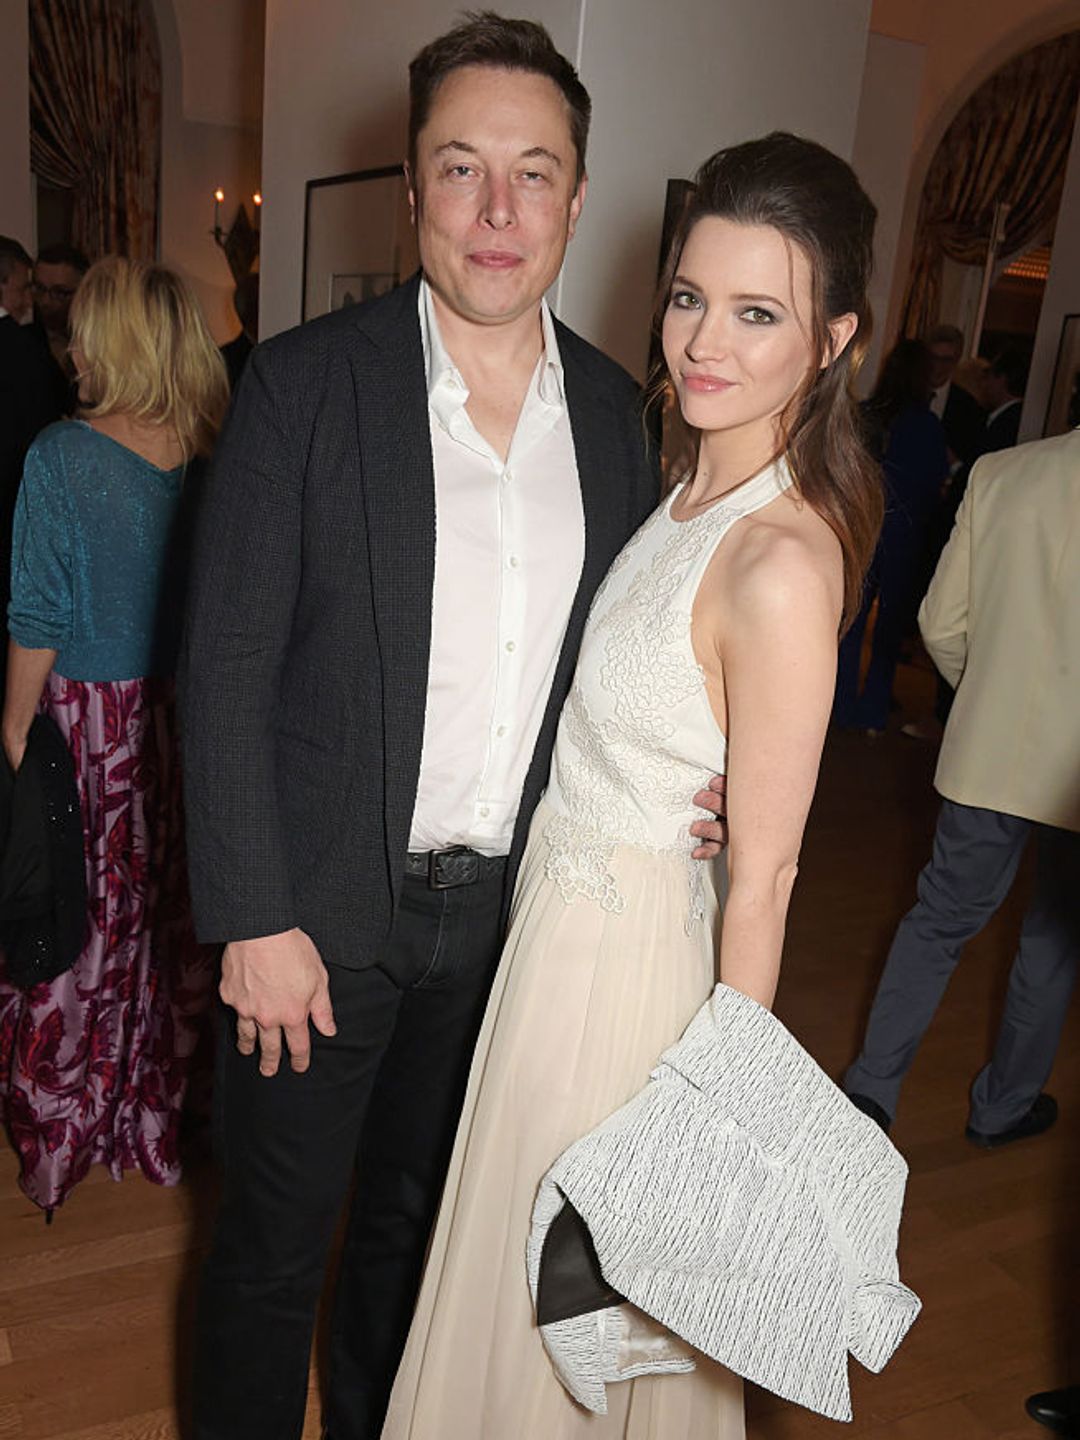 Elon Musk wearing a black suit and Talulah Riley wearing a white dress.